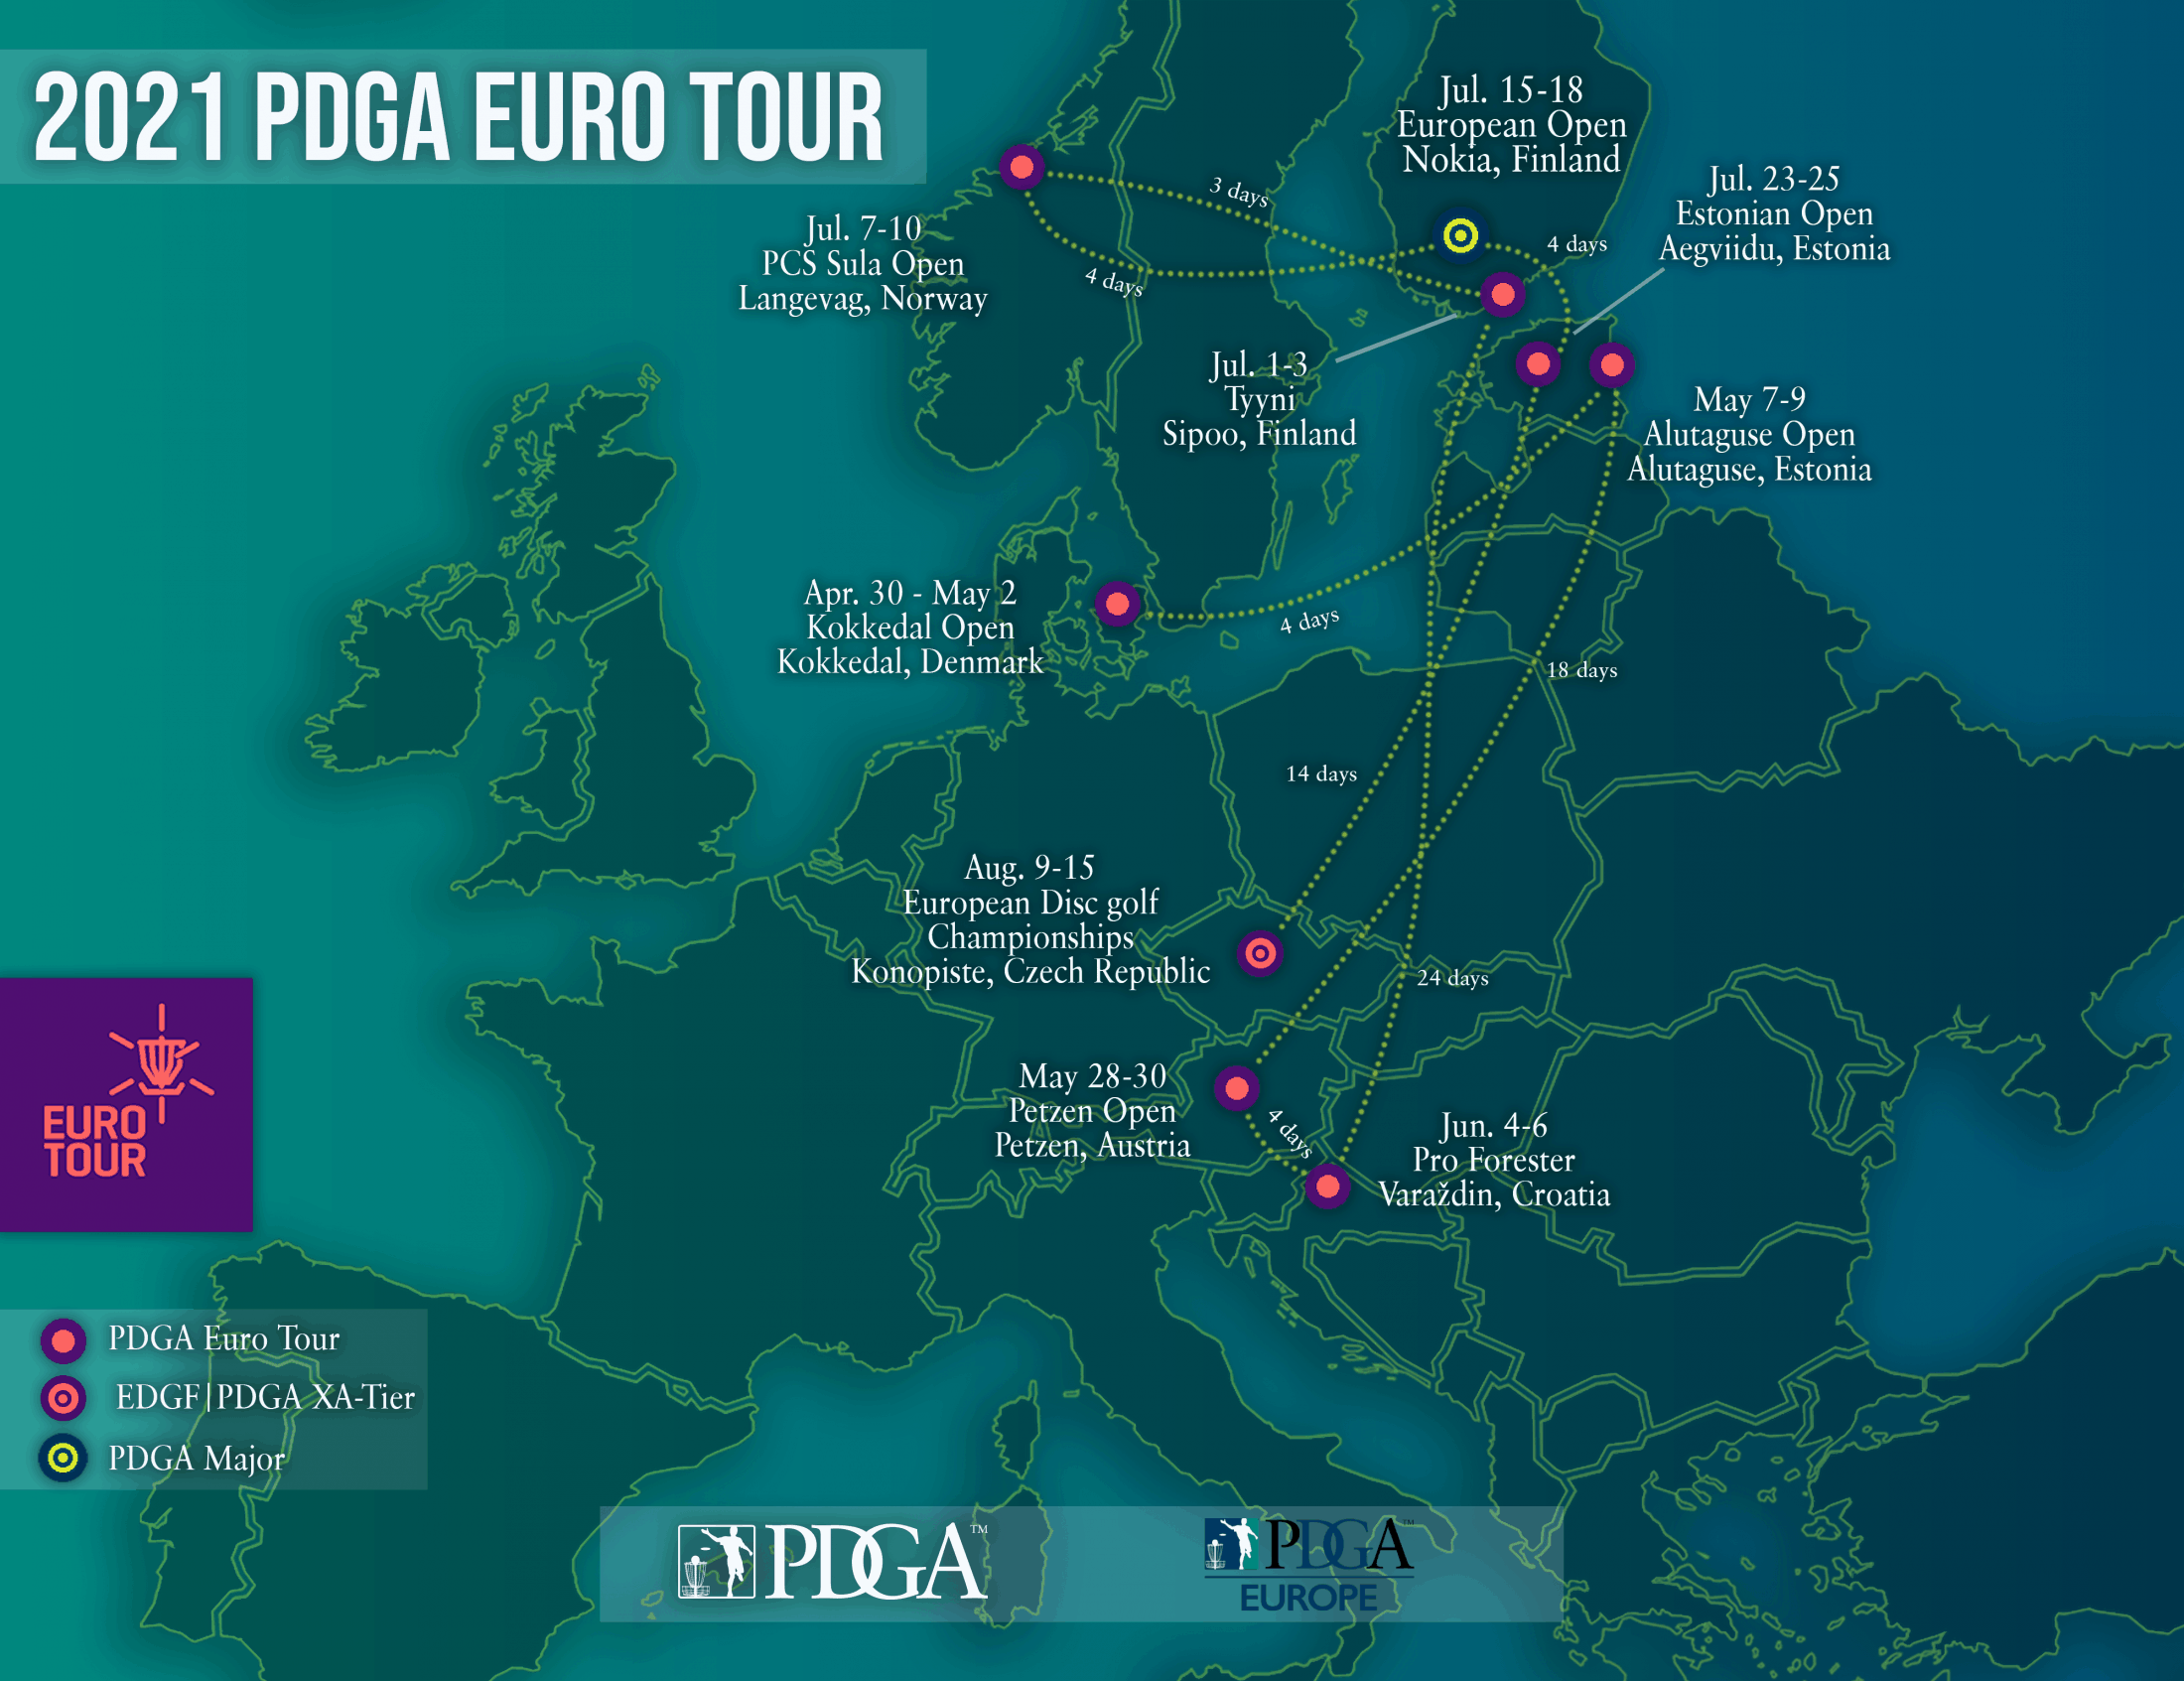 PDGA Euro Tour 2021 schedule released — Alutaguse Open 2021